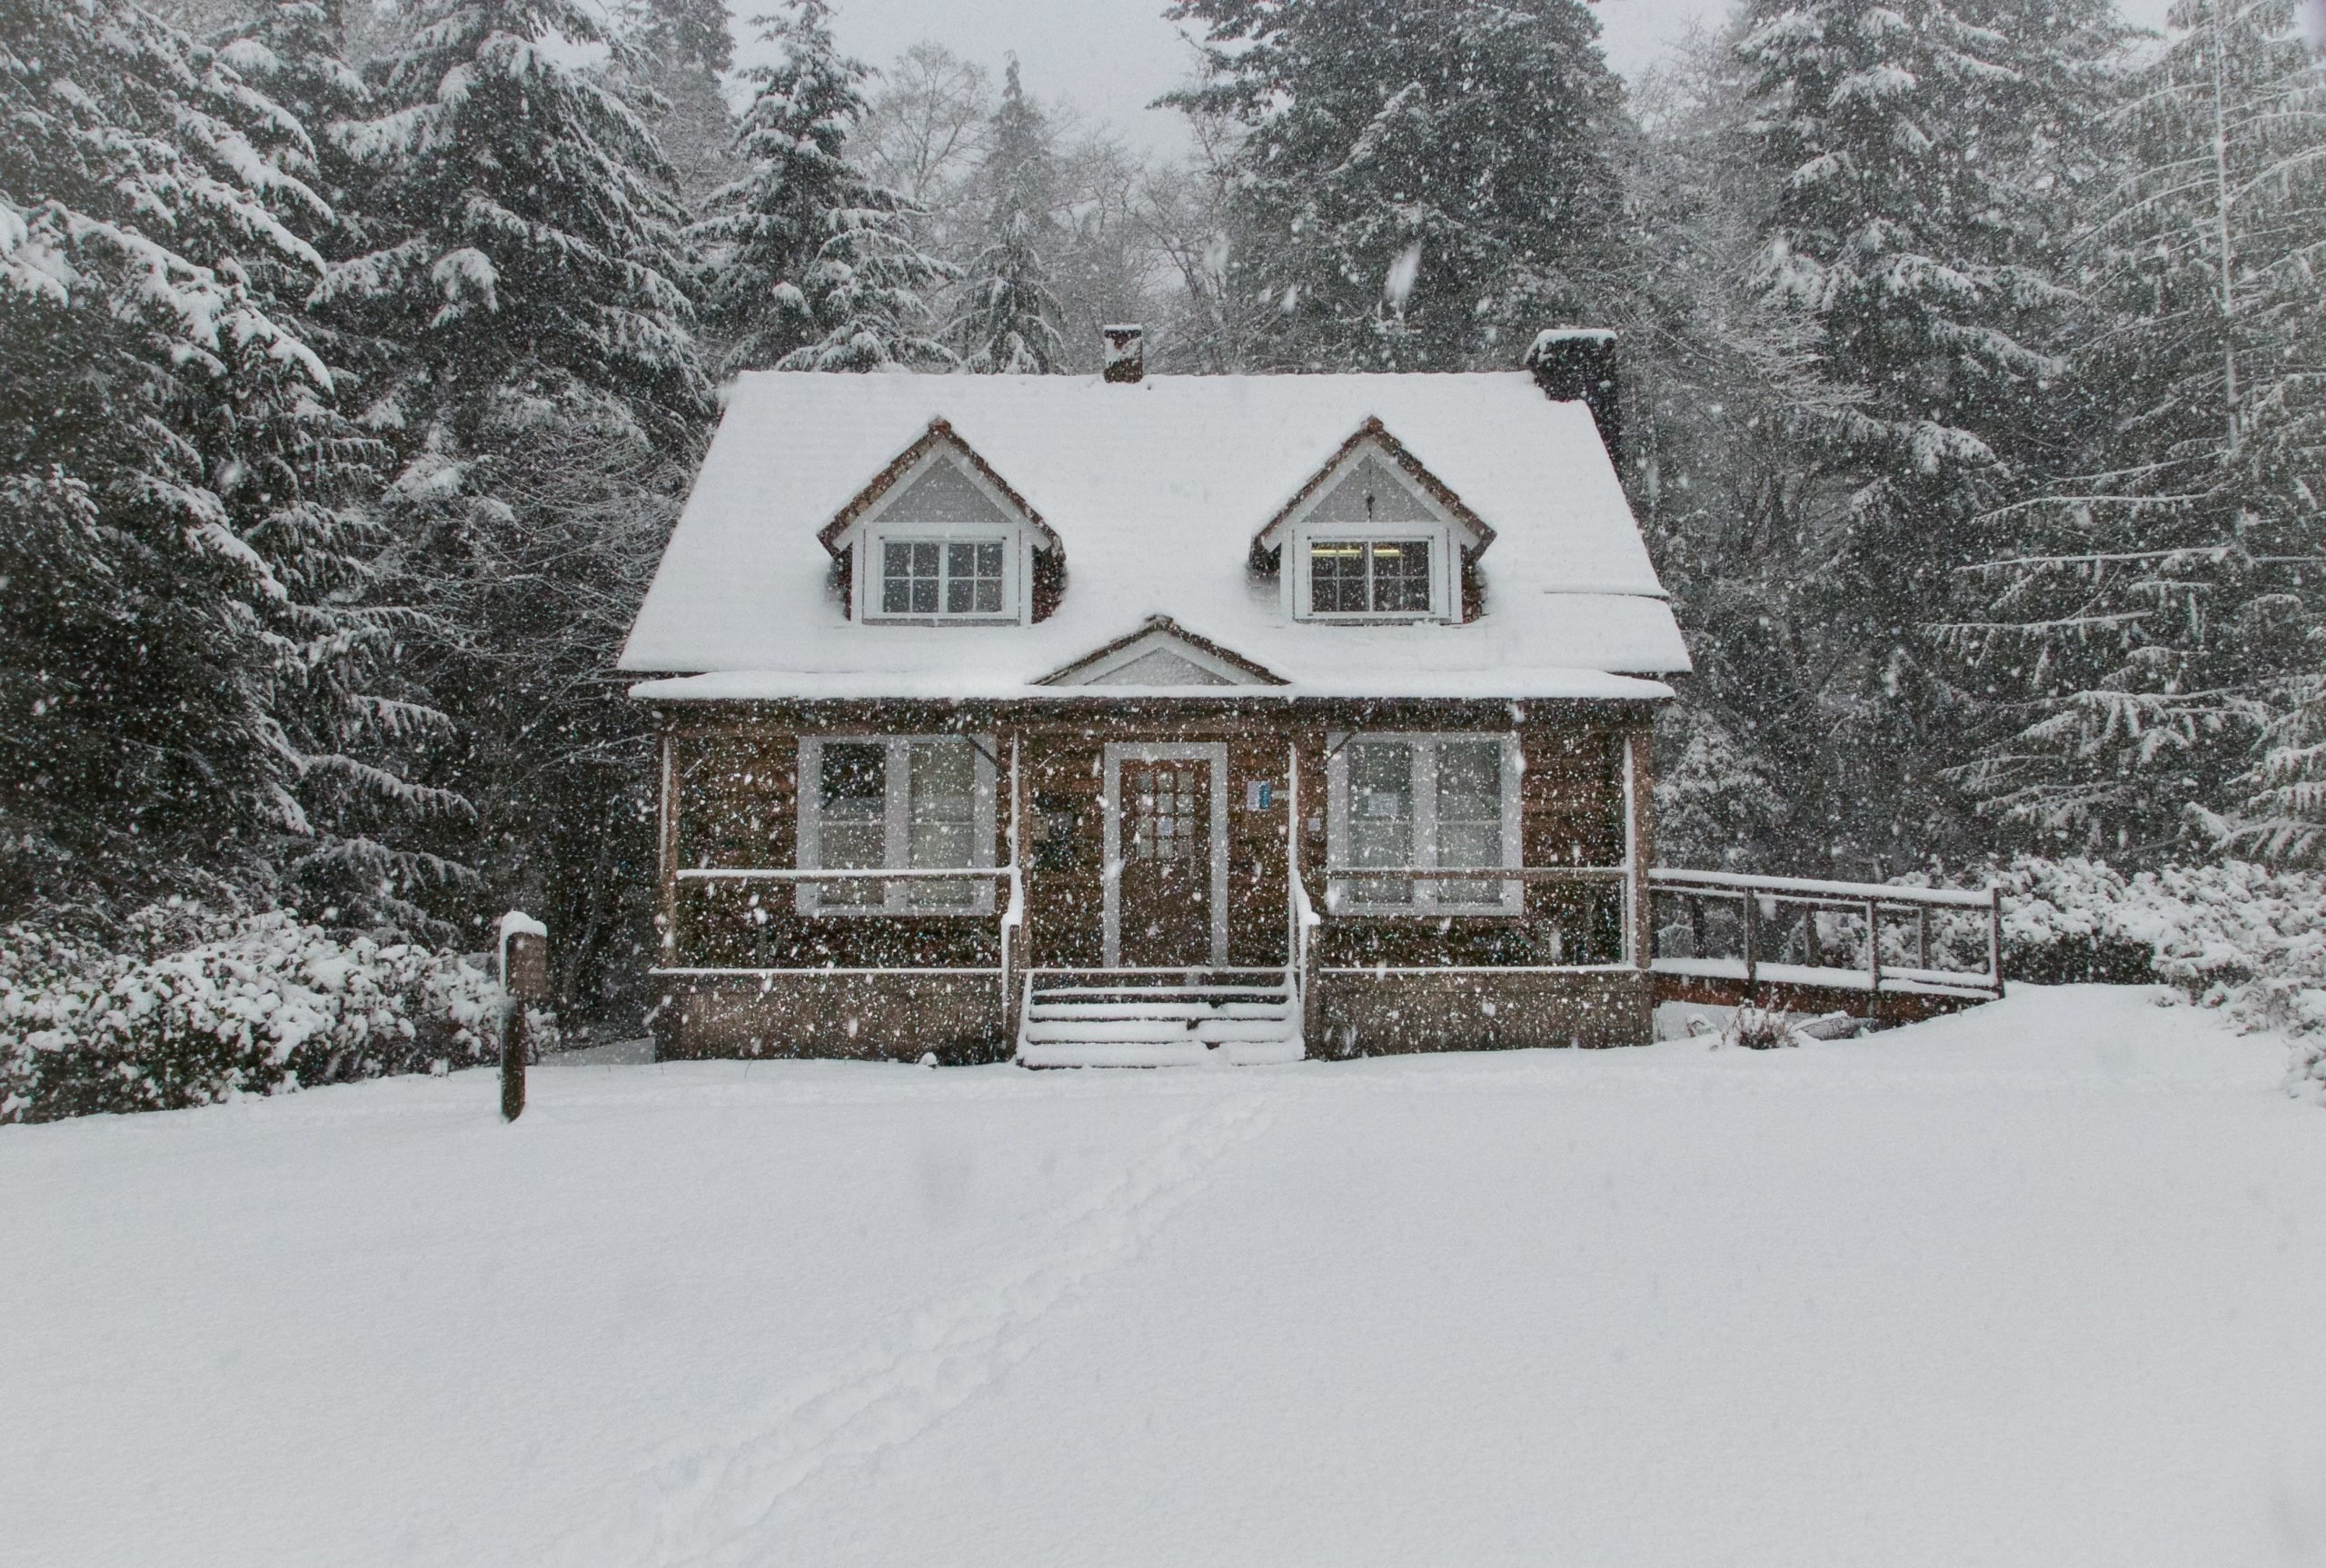 snow falling on snow covered home